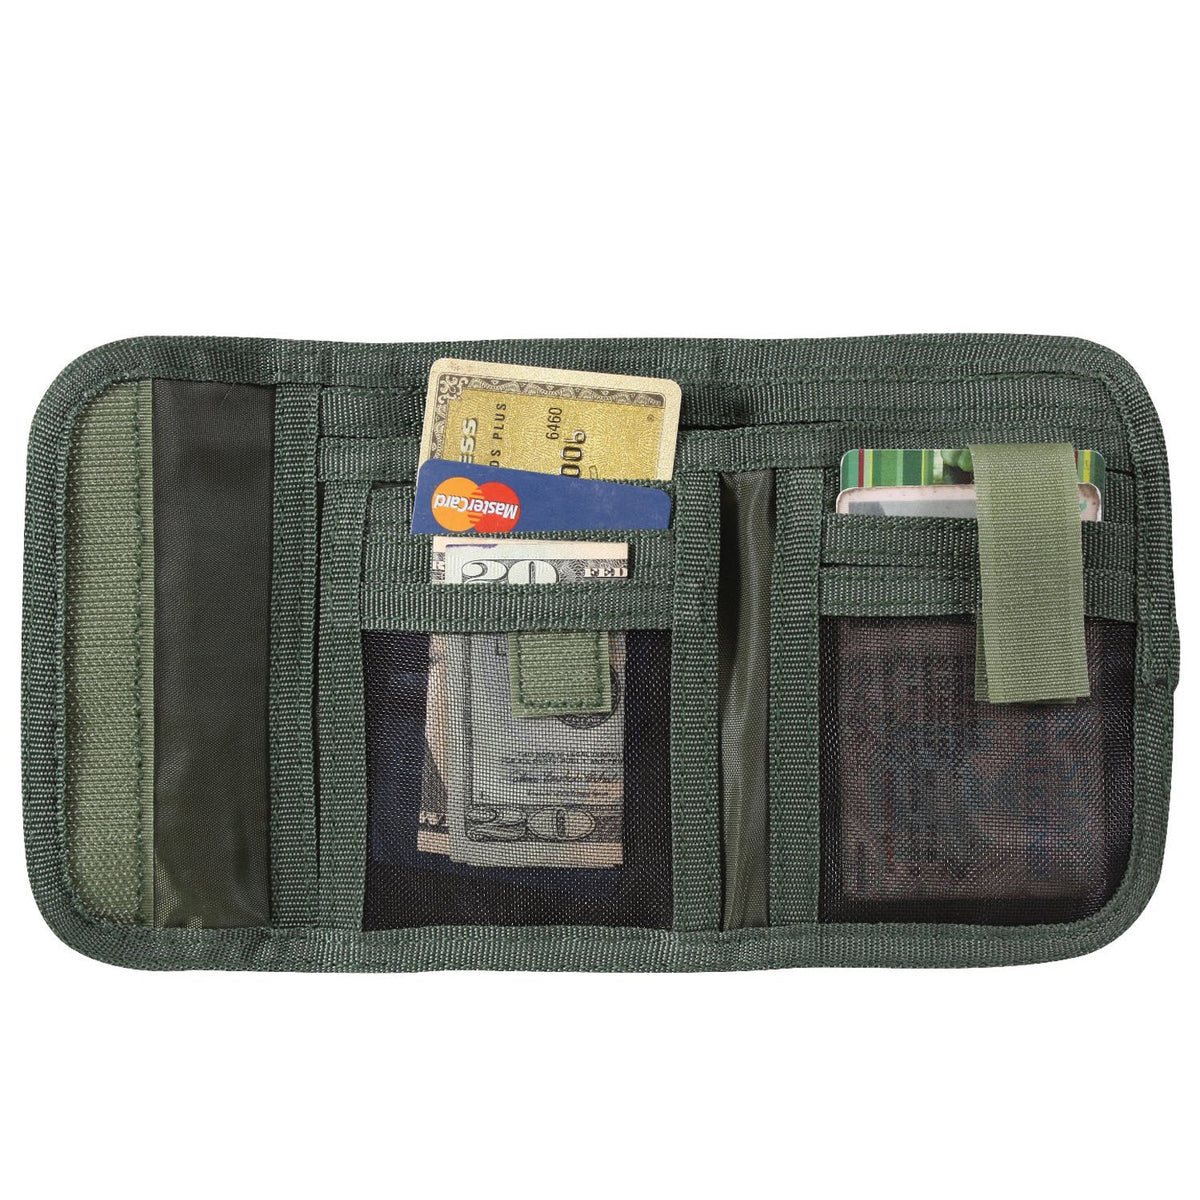 Rothco Deluxe Tri-Fold ID Wallet Woodland Camo